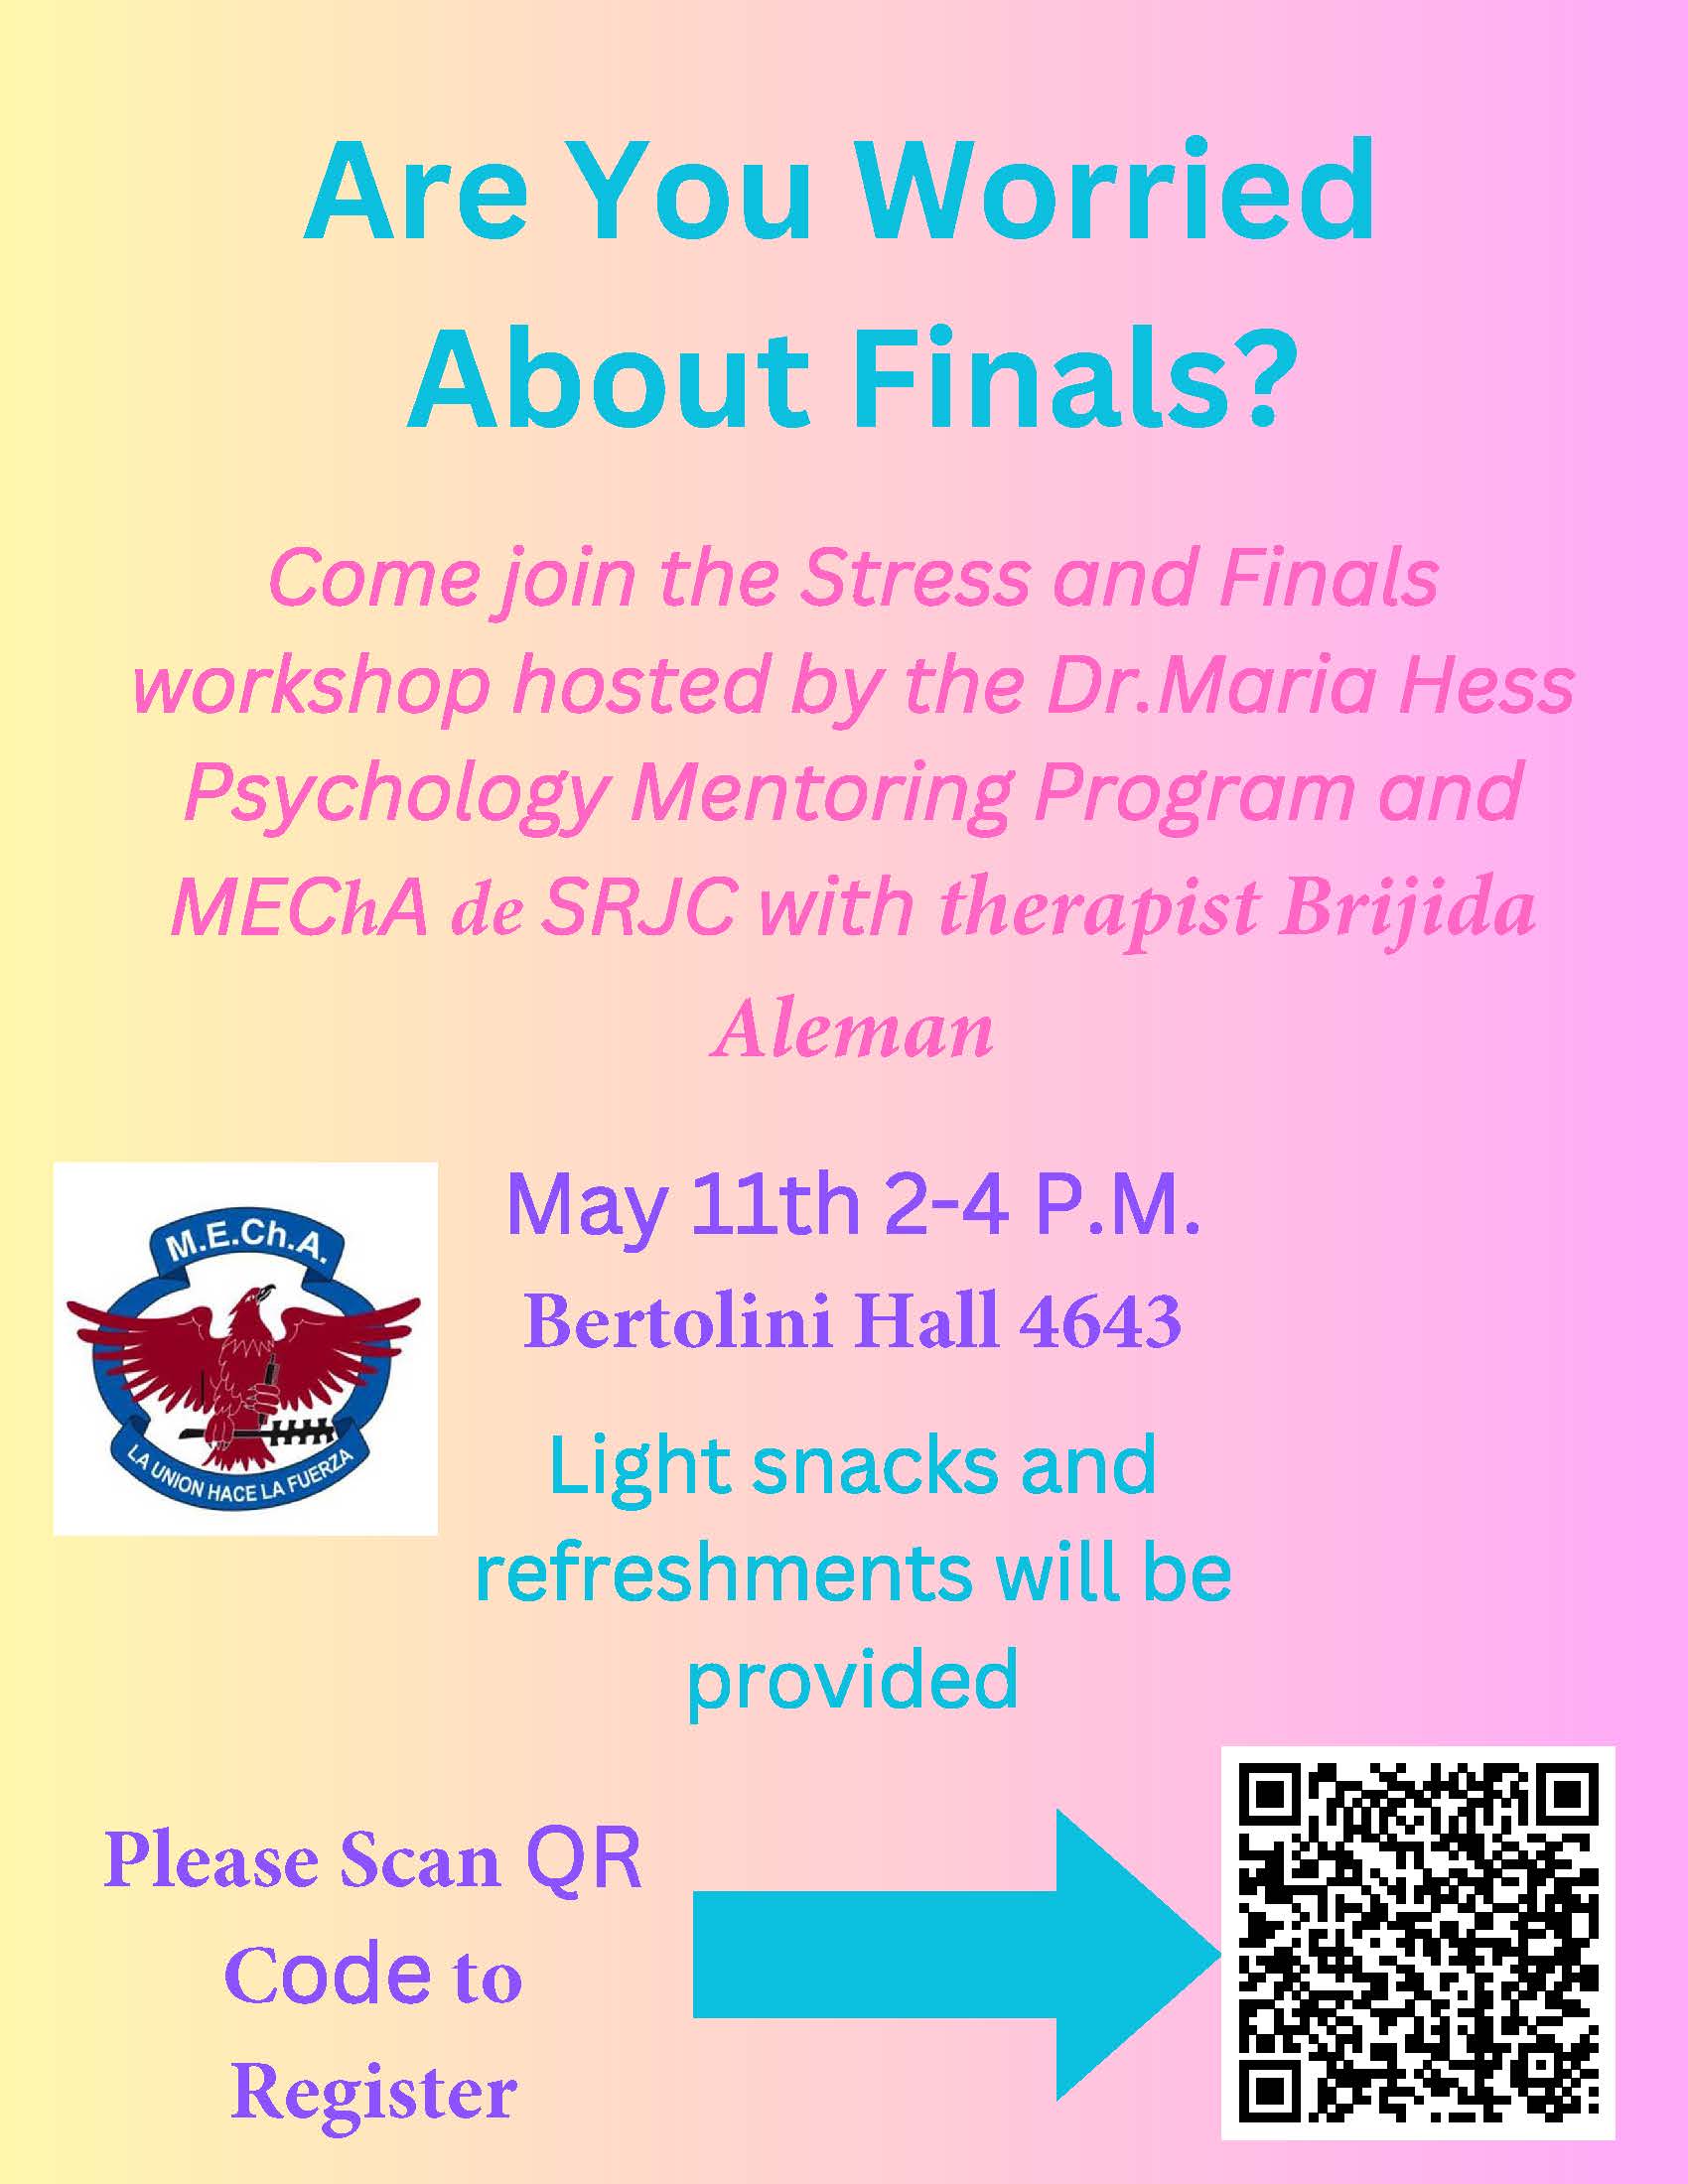 Are you Worried About Finals? Come join the Stress and Finals workshop hosted by the Dr. Maria Hess Psychology Mentoring Program and MECHA de SRJC with Therapist Brijida Aleman May 11th 2-4pm Bertolini Hall 4643 Light snacks and refreshments will be provided. Please fill out the Google Form link below to register.